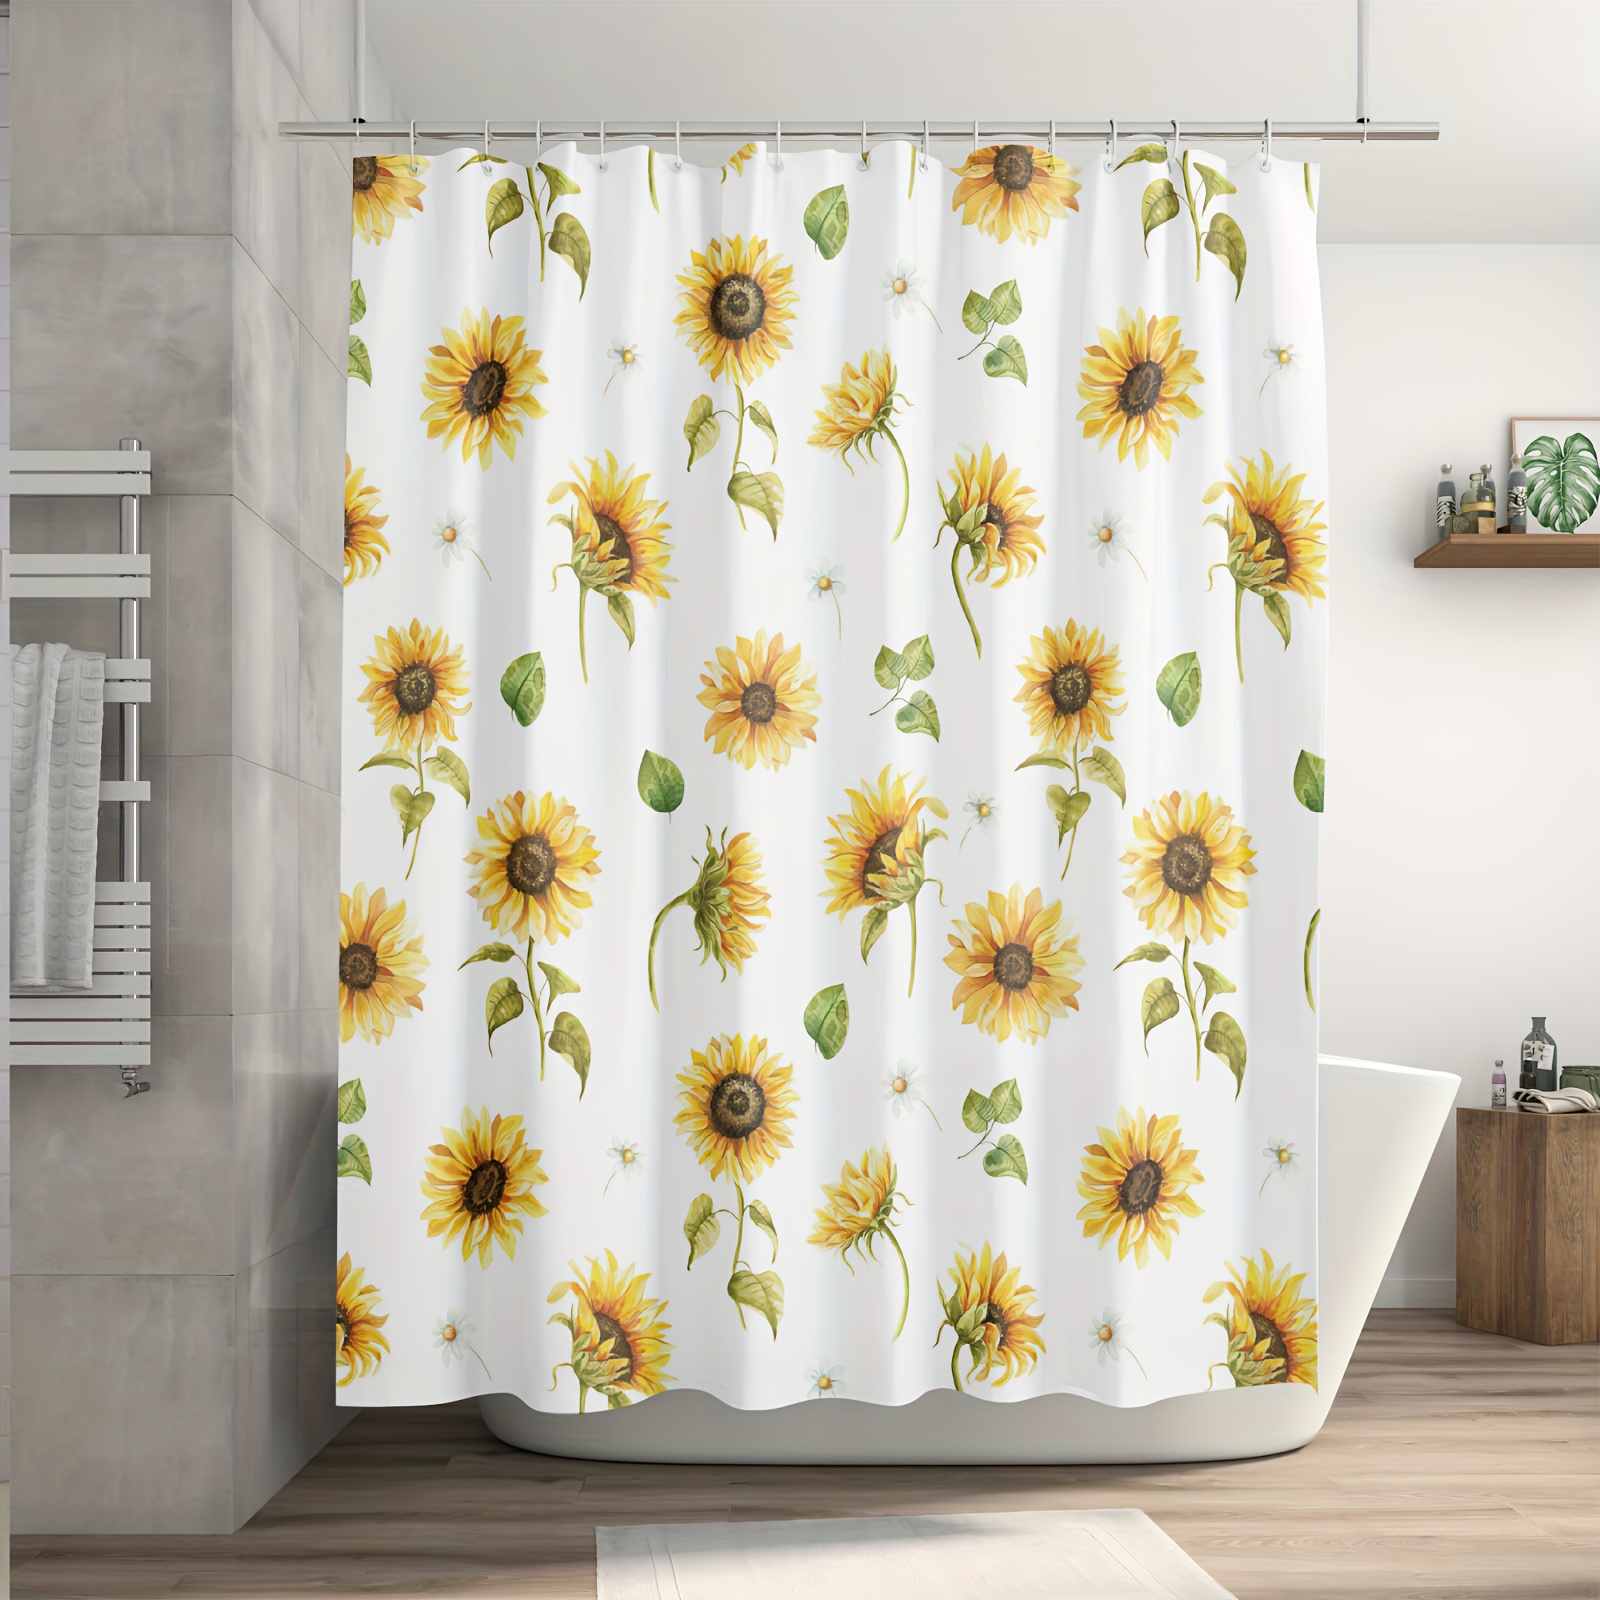 Ombre Shower Curtain Yellow Shower Curtains Modern Simple Shower Curtain  Set with Hooks Water Repellent Sunflower Shower Curtain for Bathroom Hotel,  72x72 inch, Yellow 